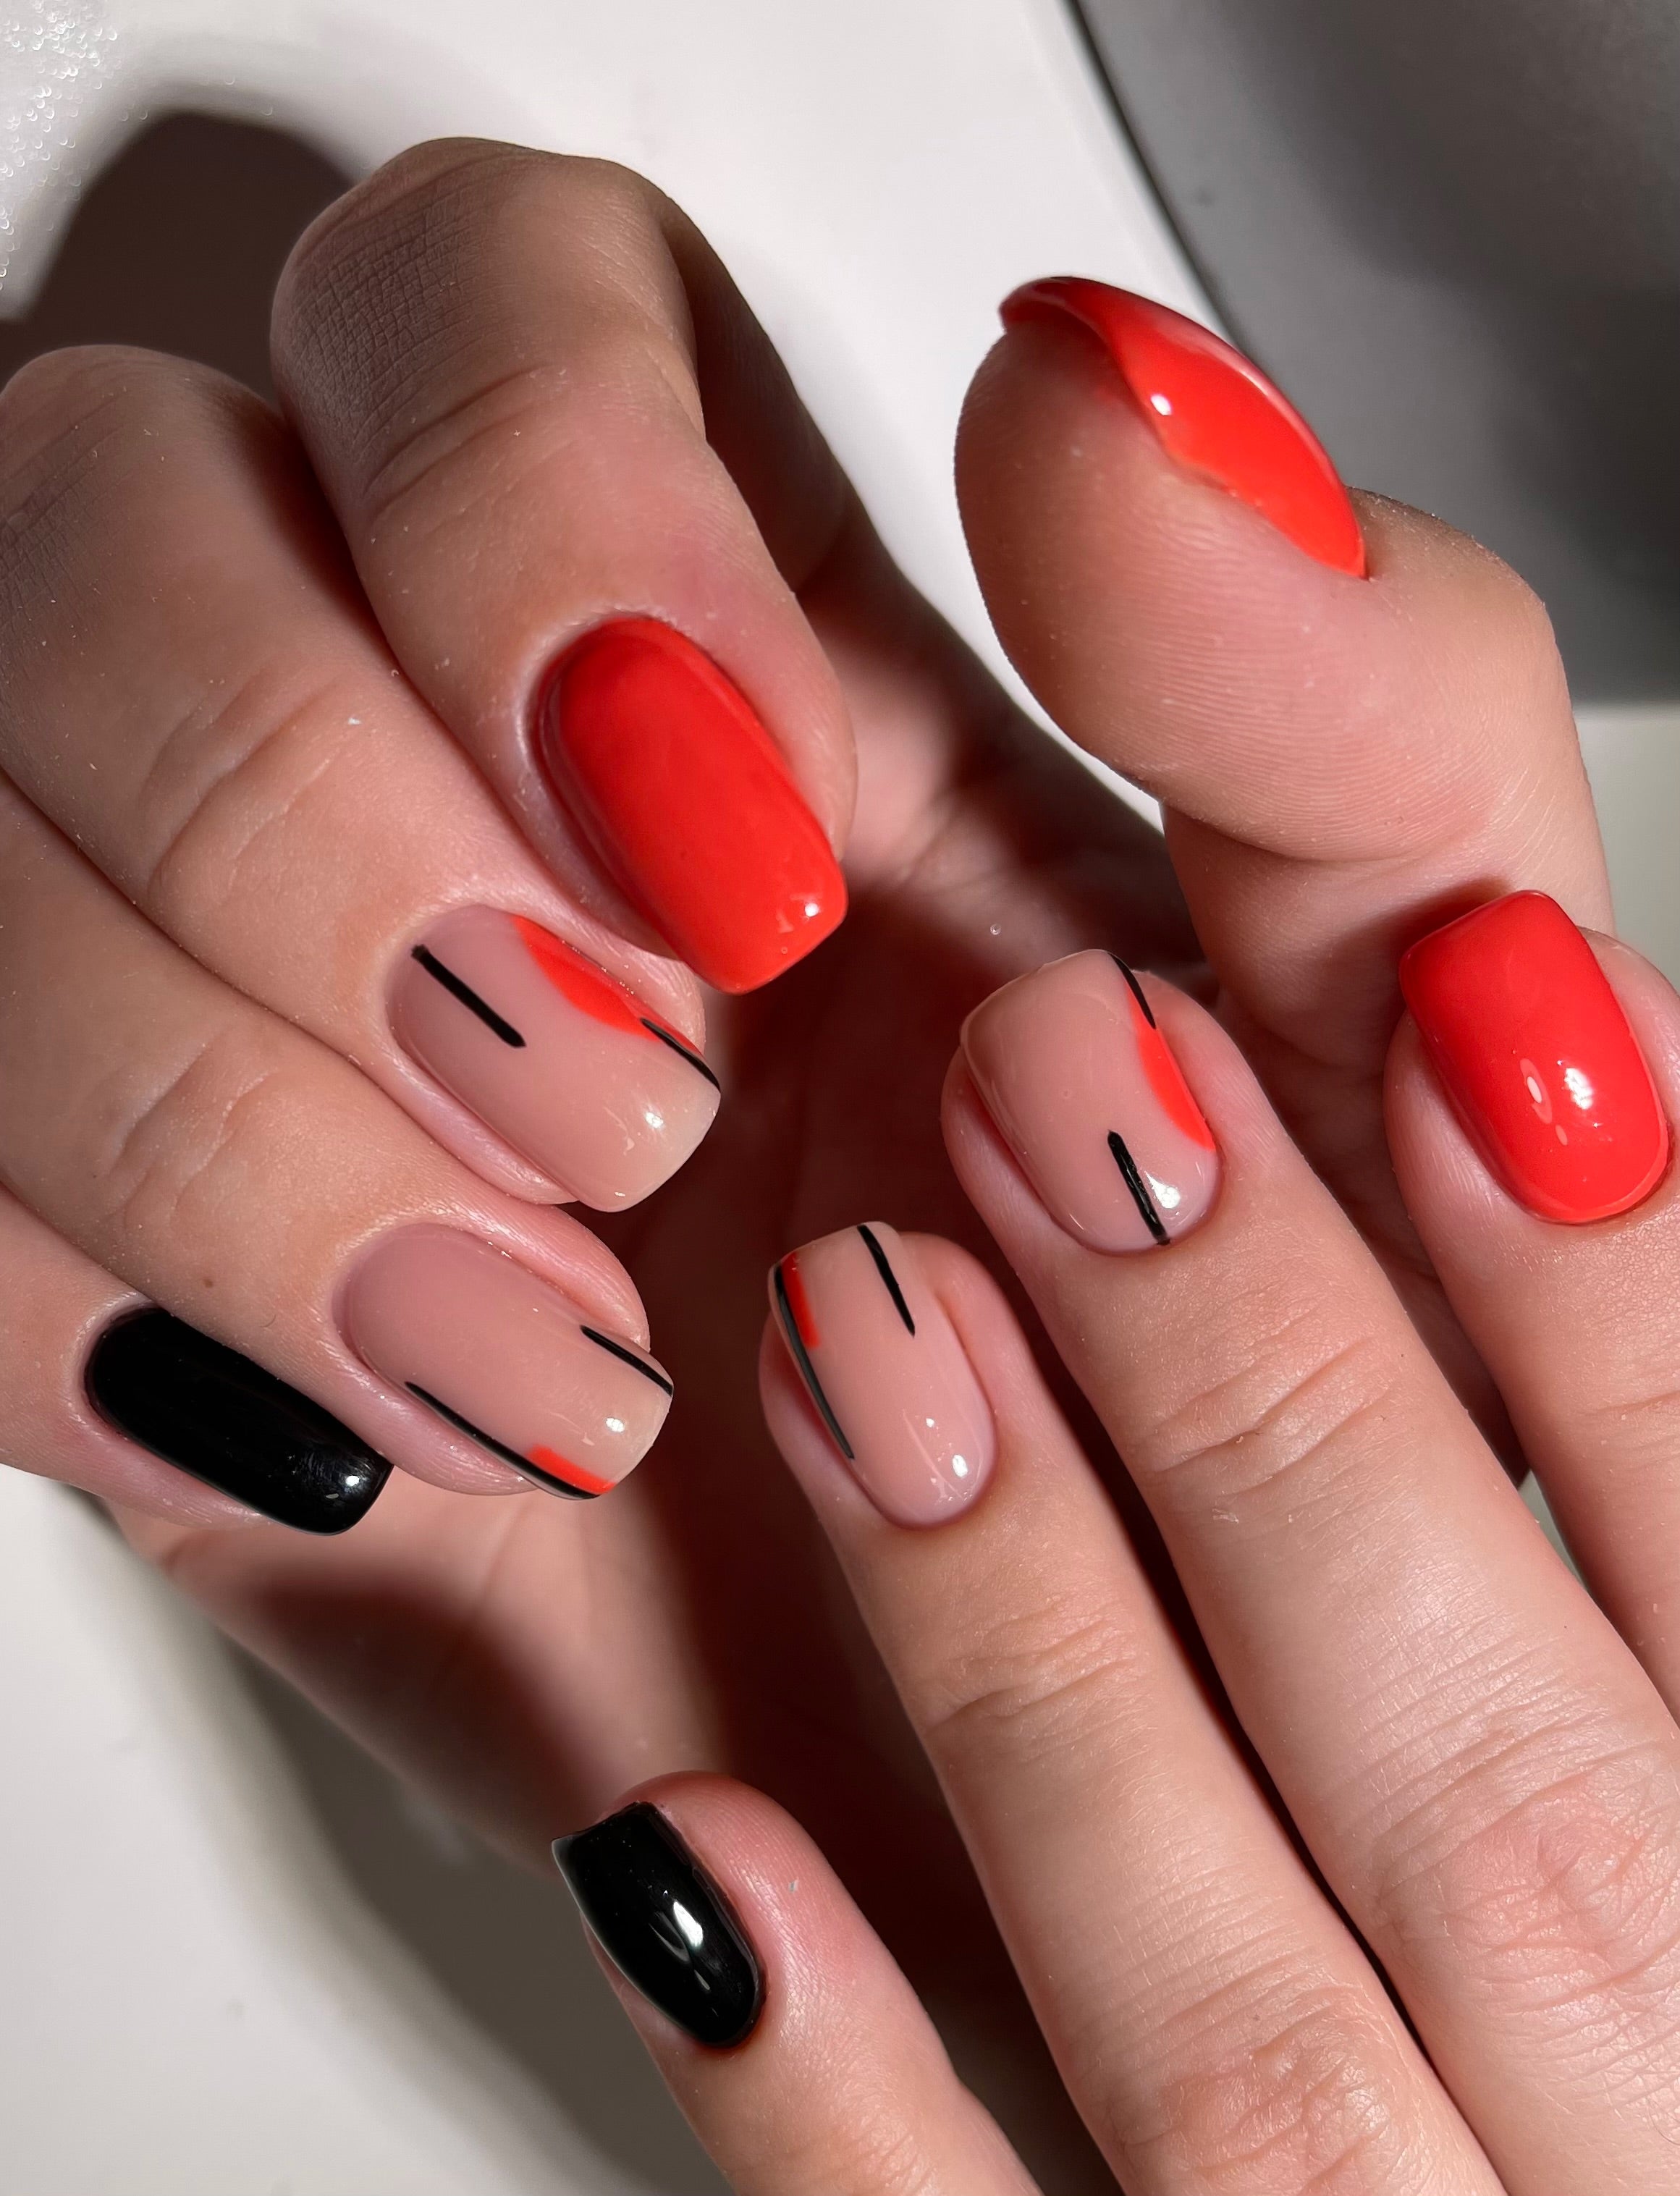 Russian Manicure | What is it and How to Get The Look